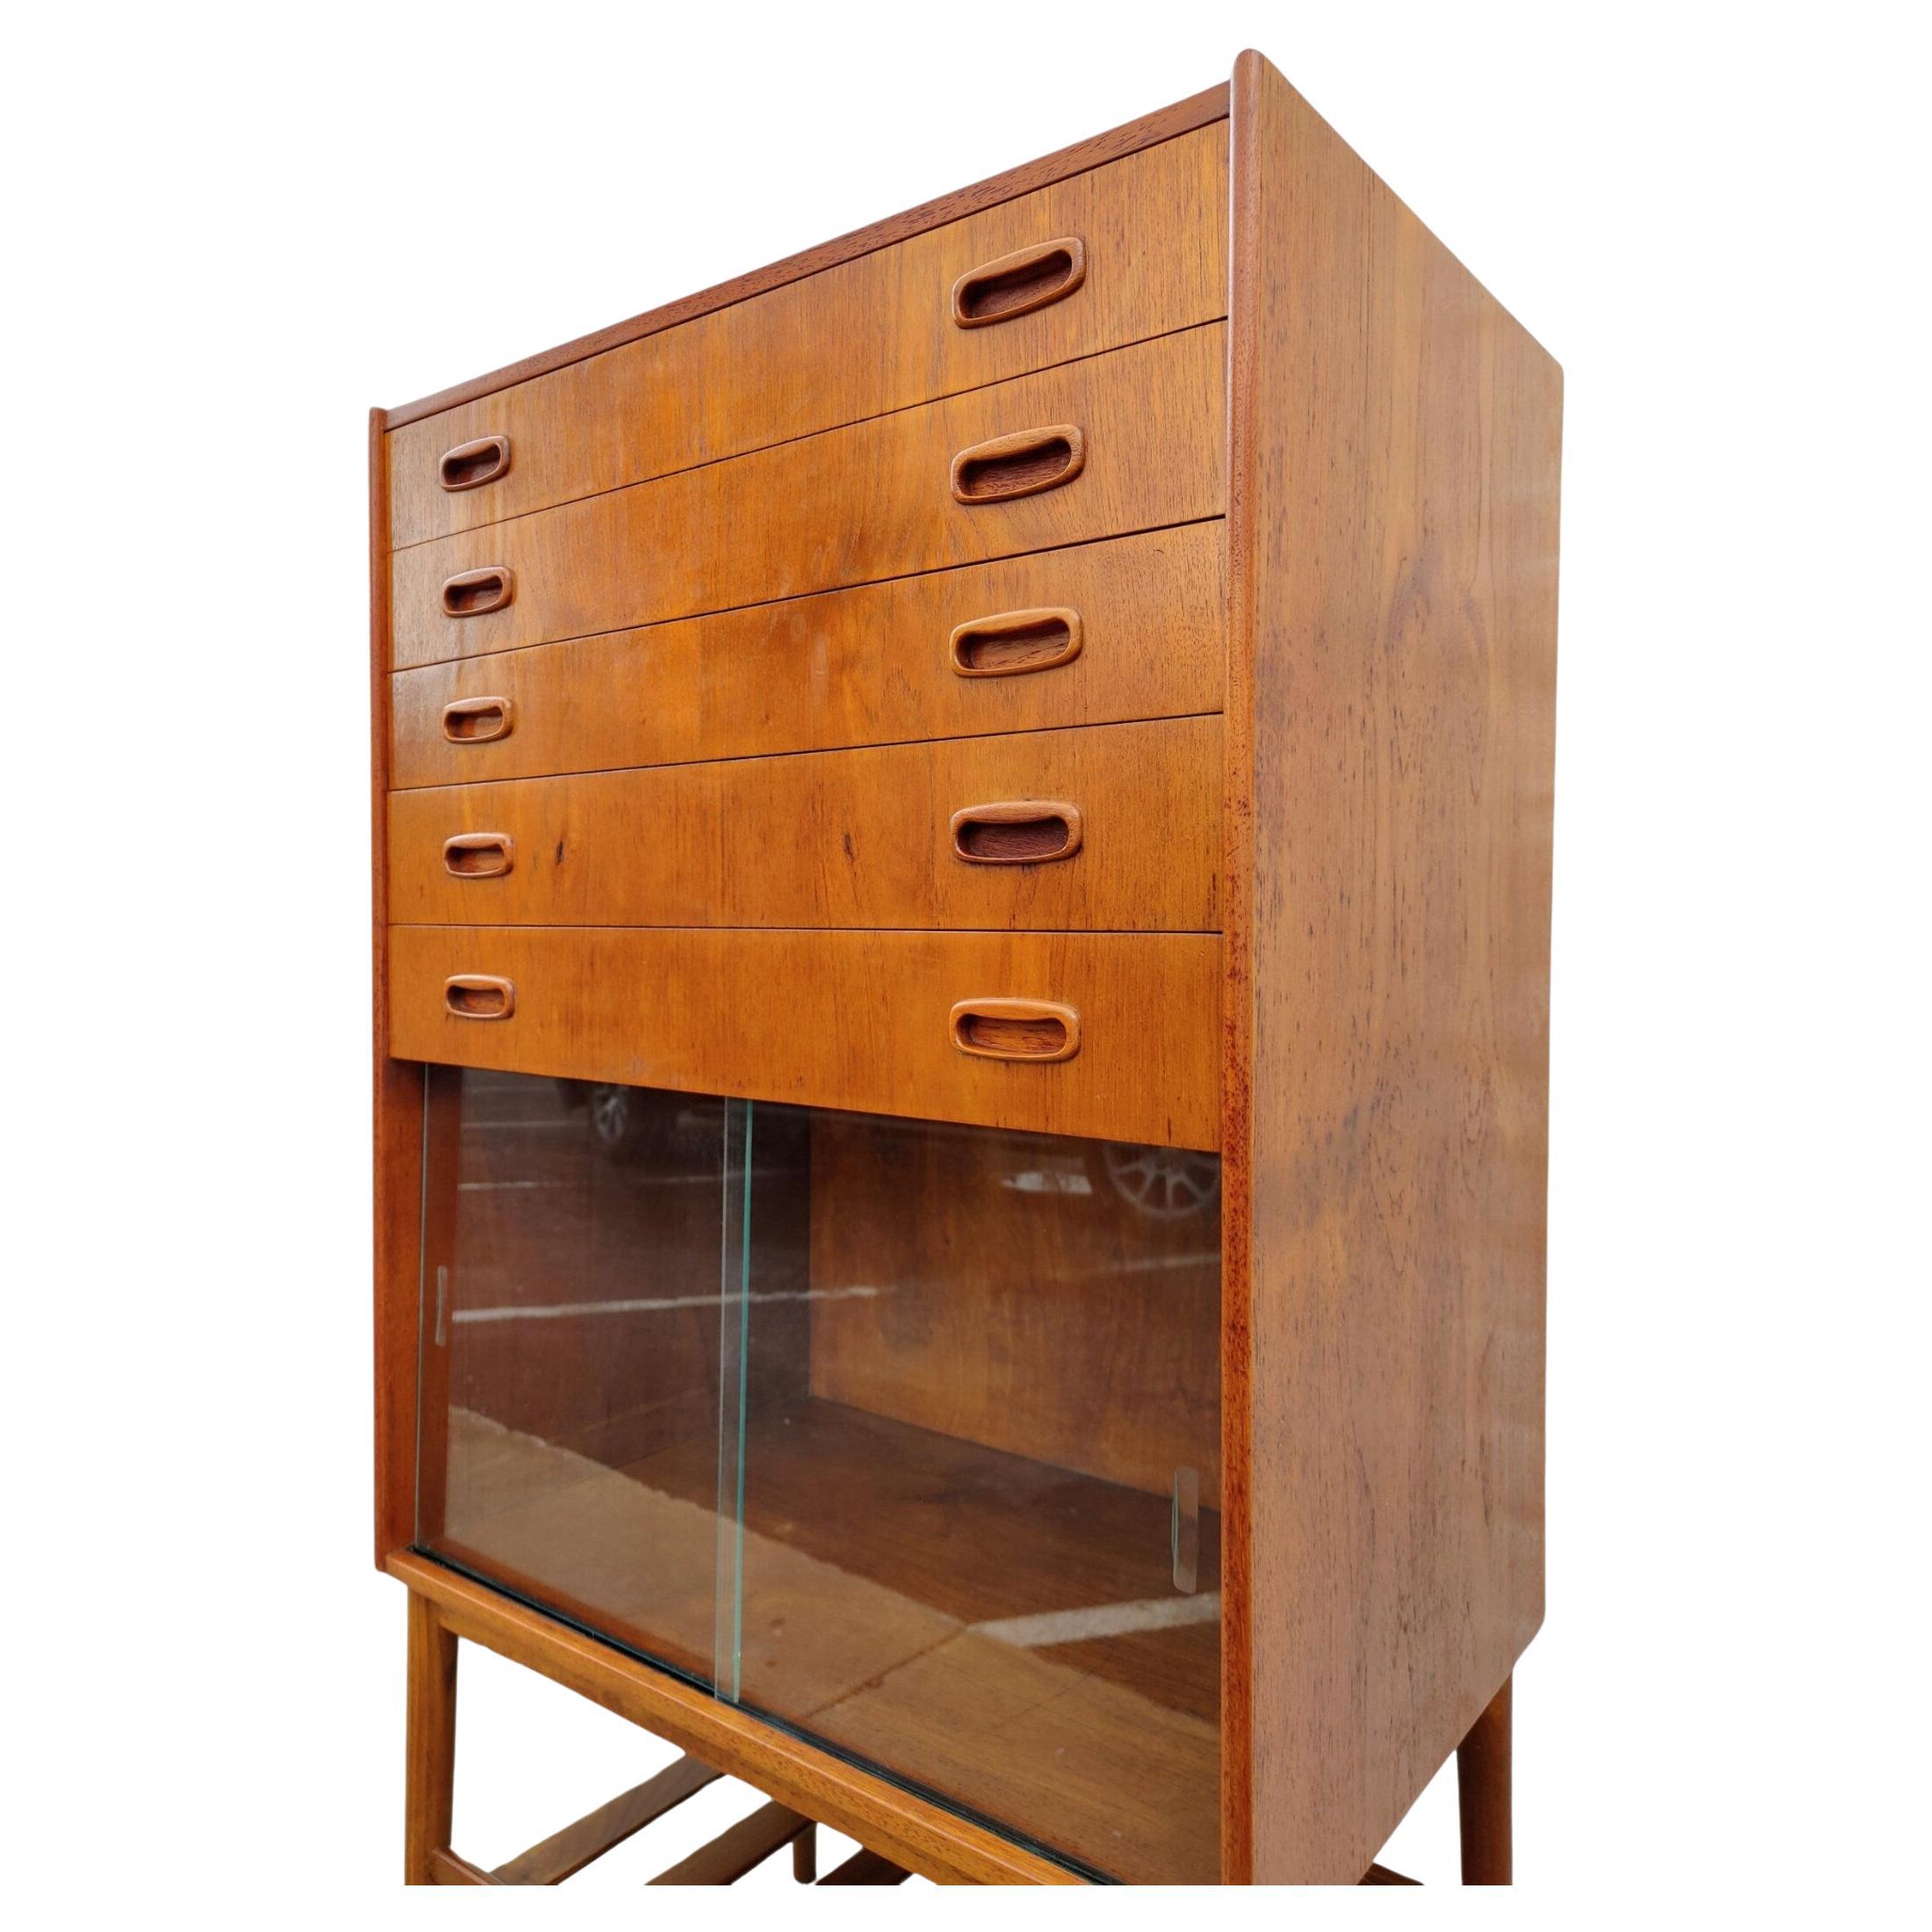 Mid Century Modern Danish Inspired Teak Cabinet

Above average vintage condition and structurally sound. Has some expected slight finish wear, dark blemishes and scratching. Please request additional pictures. 

Additional information:
Materials: